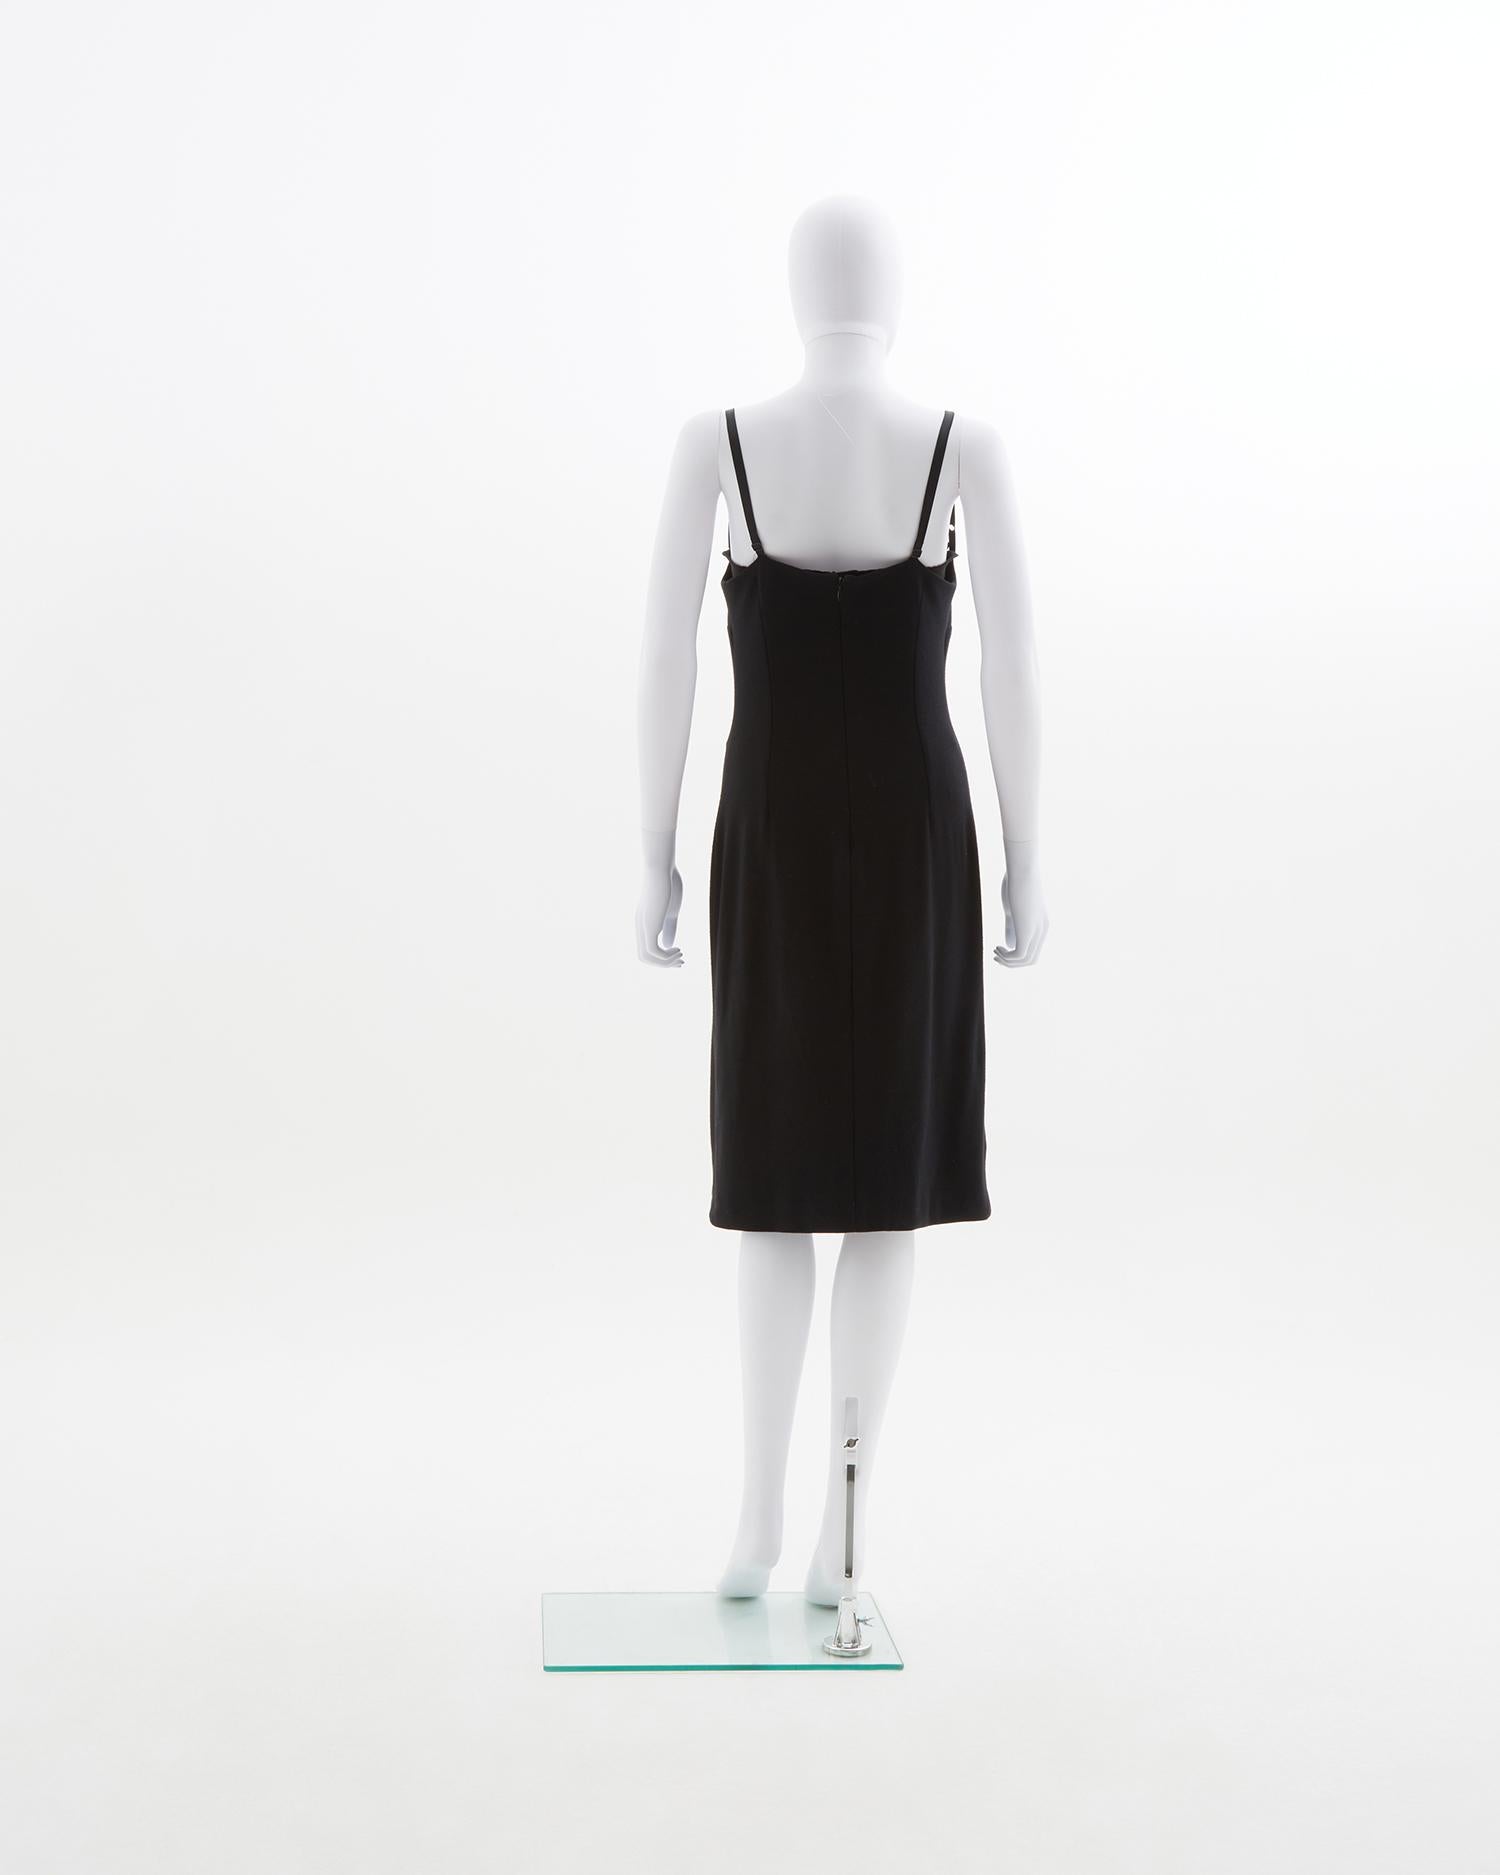 Black Dolce & Gabbana black stretch bodycon cocktail dress, early 2000s For Sale